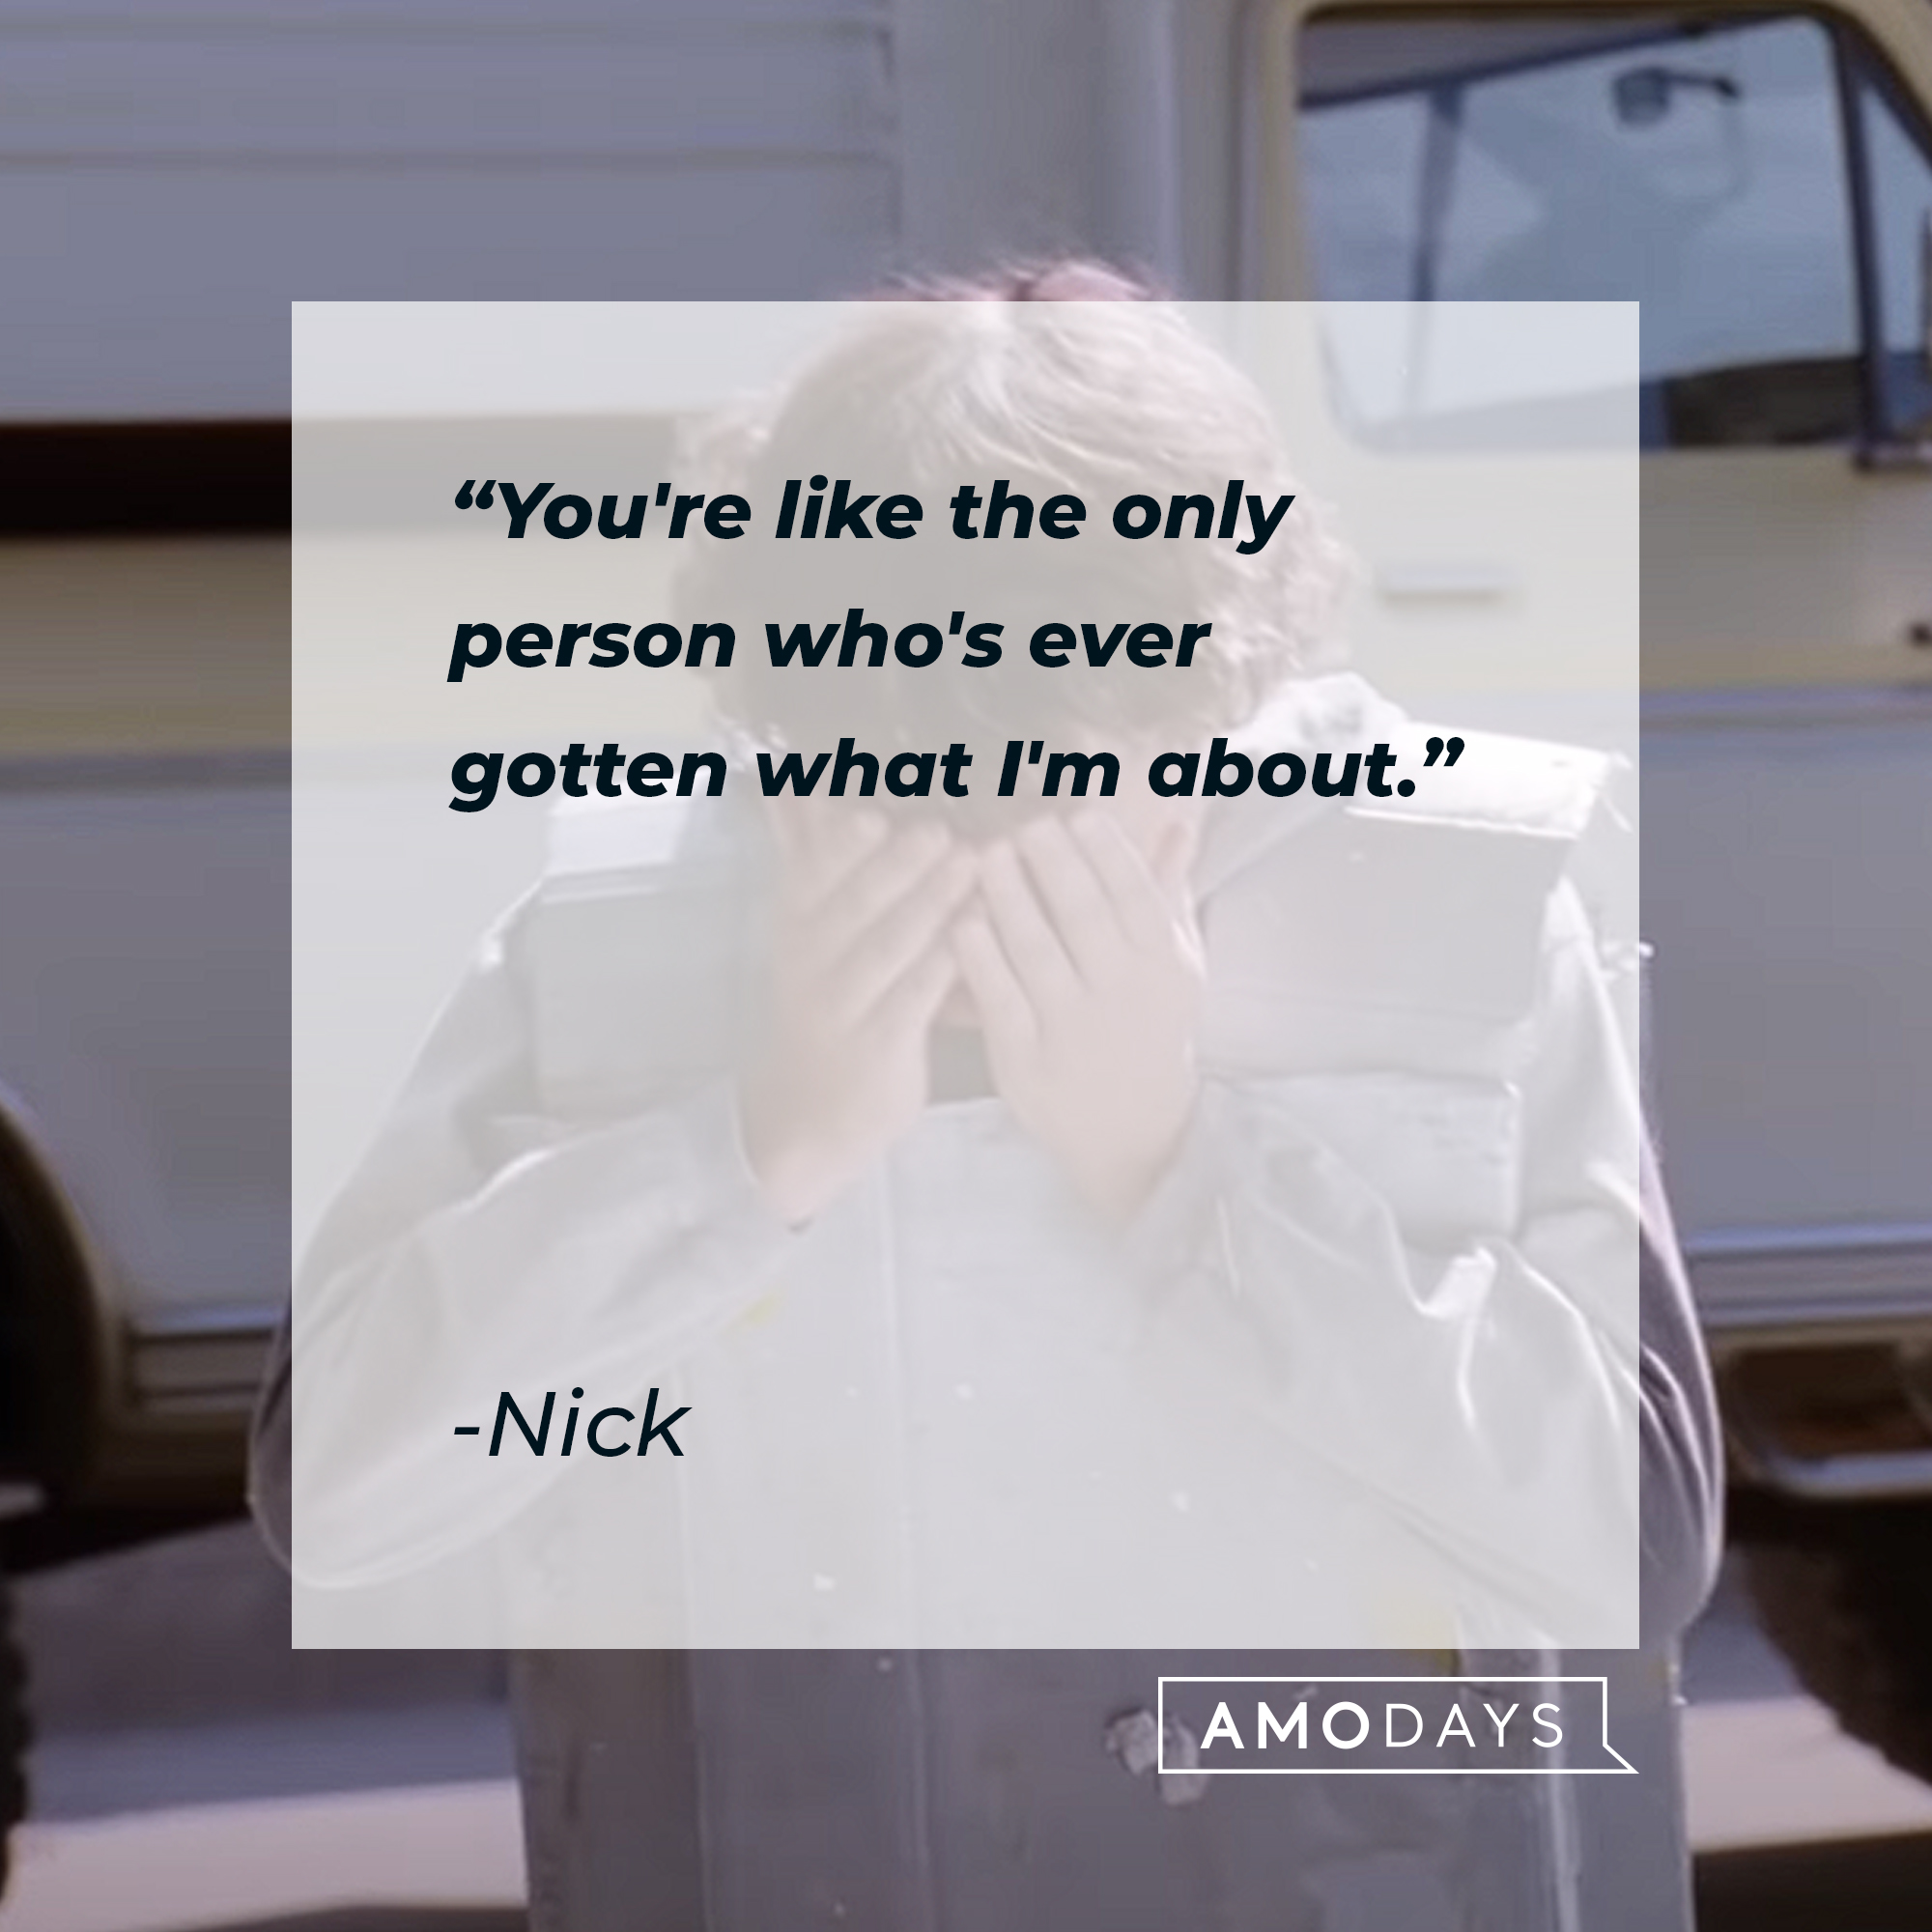 Nick's quote: "You're like the only person who's ever gotten what I'm about." | Source: Youtube.com/paramountmovies